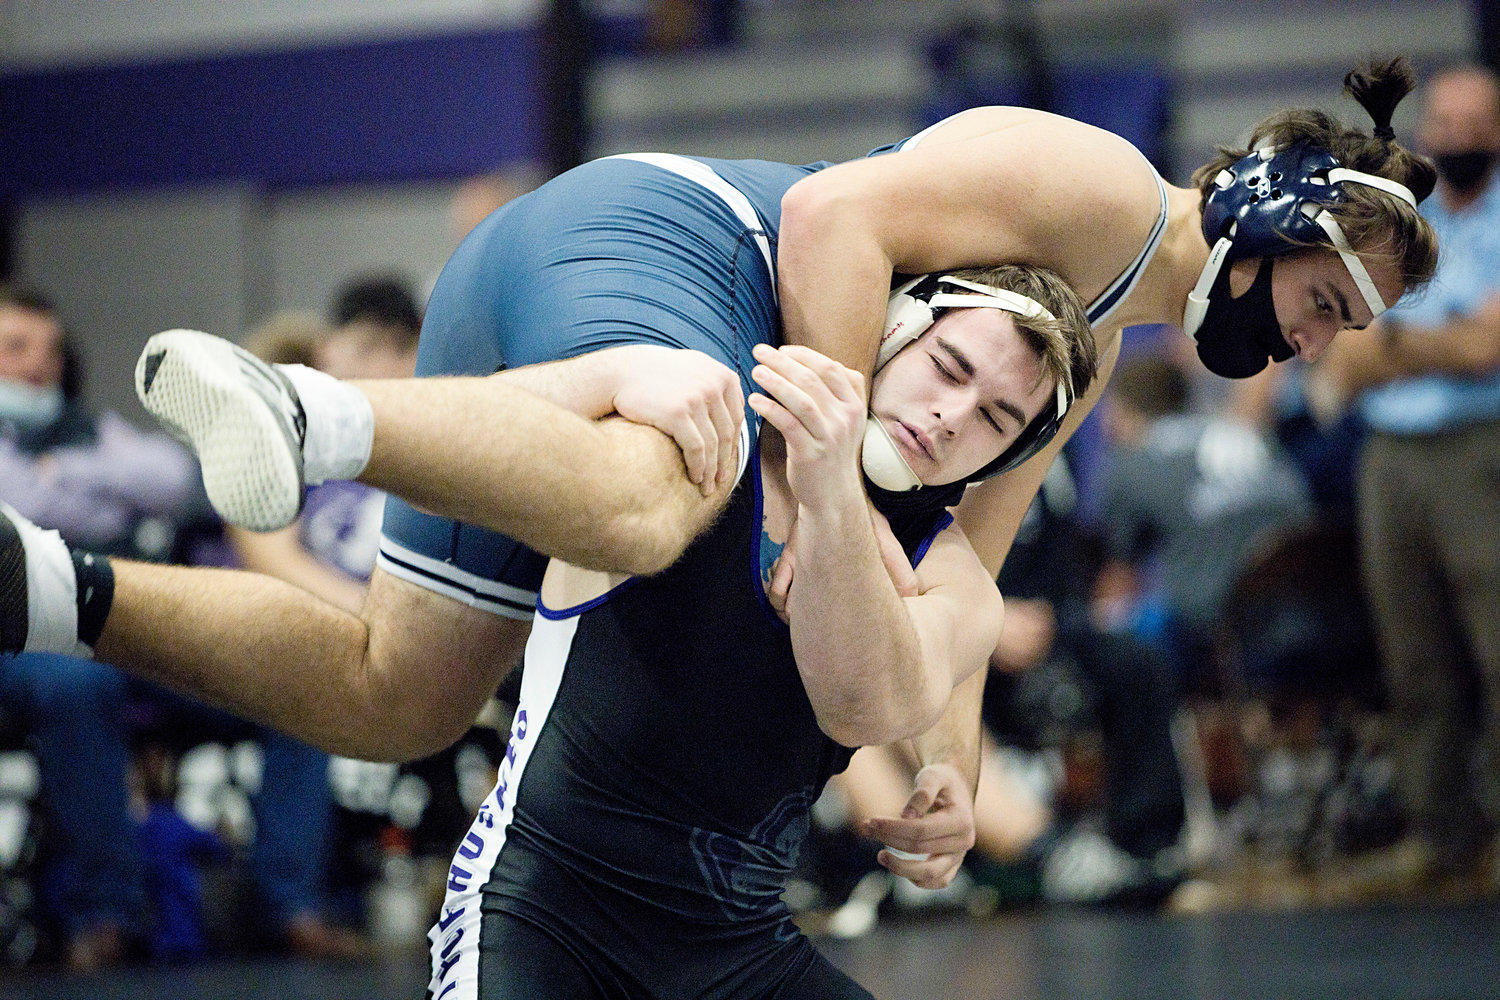 Senior 195 pound wrestler Lucas Brum hoists a Needham opponent over his head during the Sharon Lombardo tournament on Saturday.